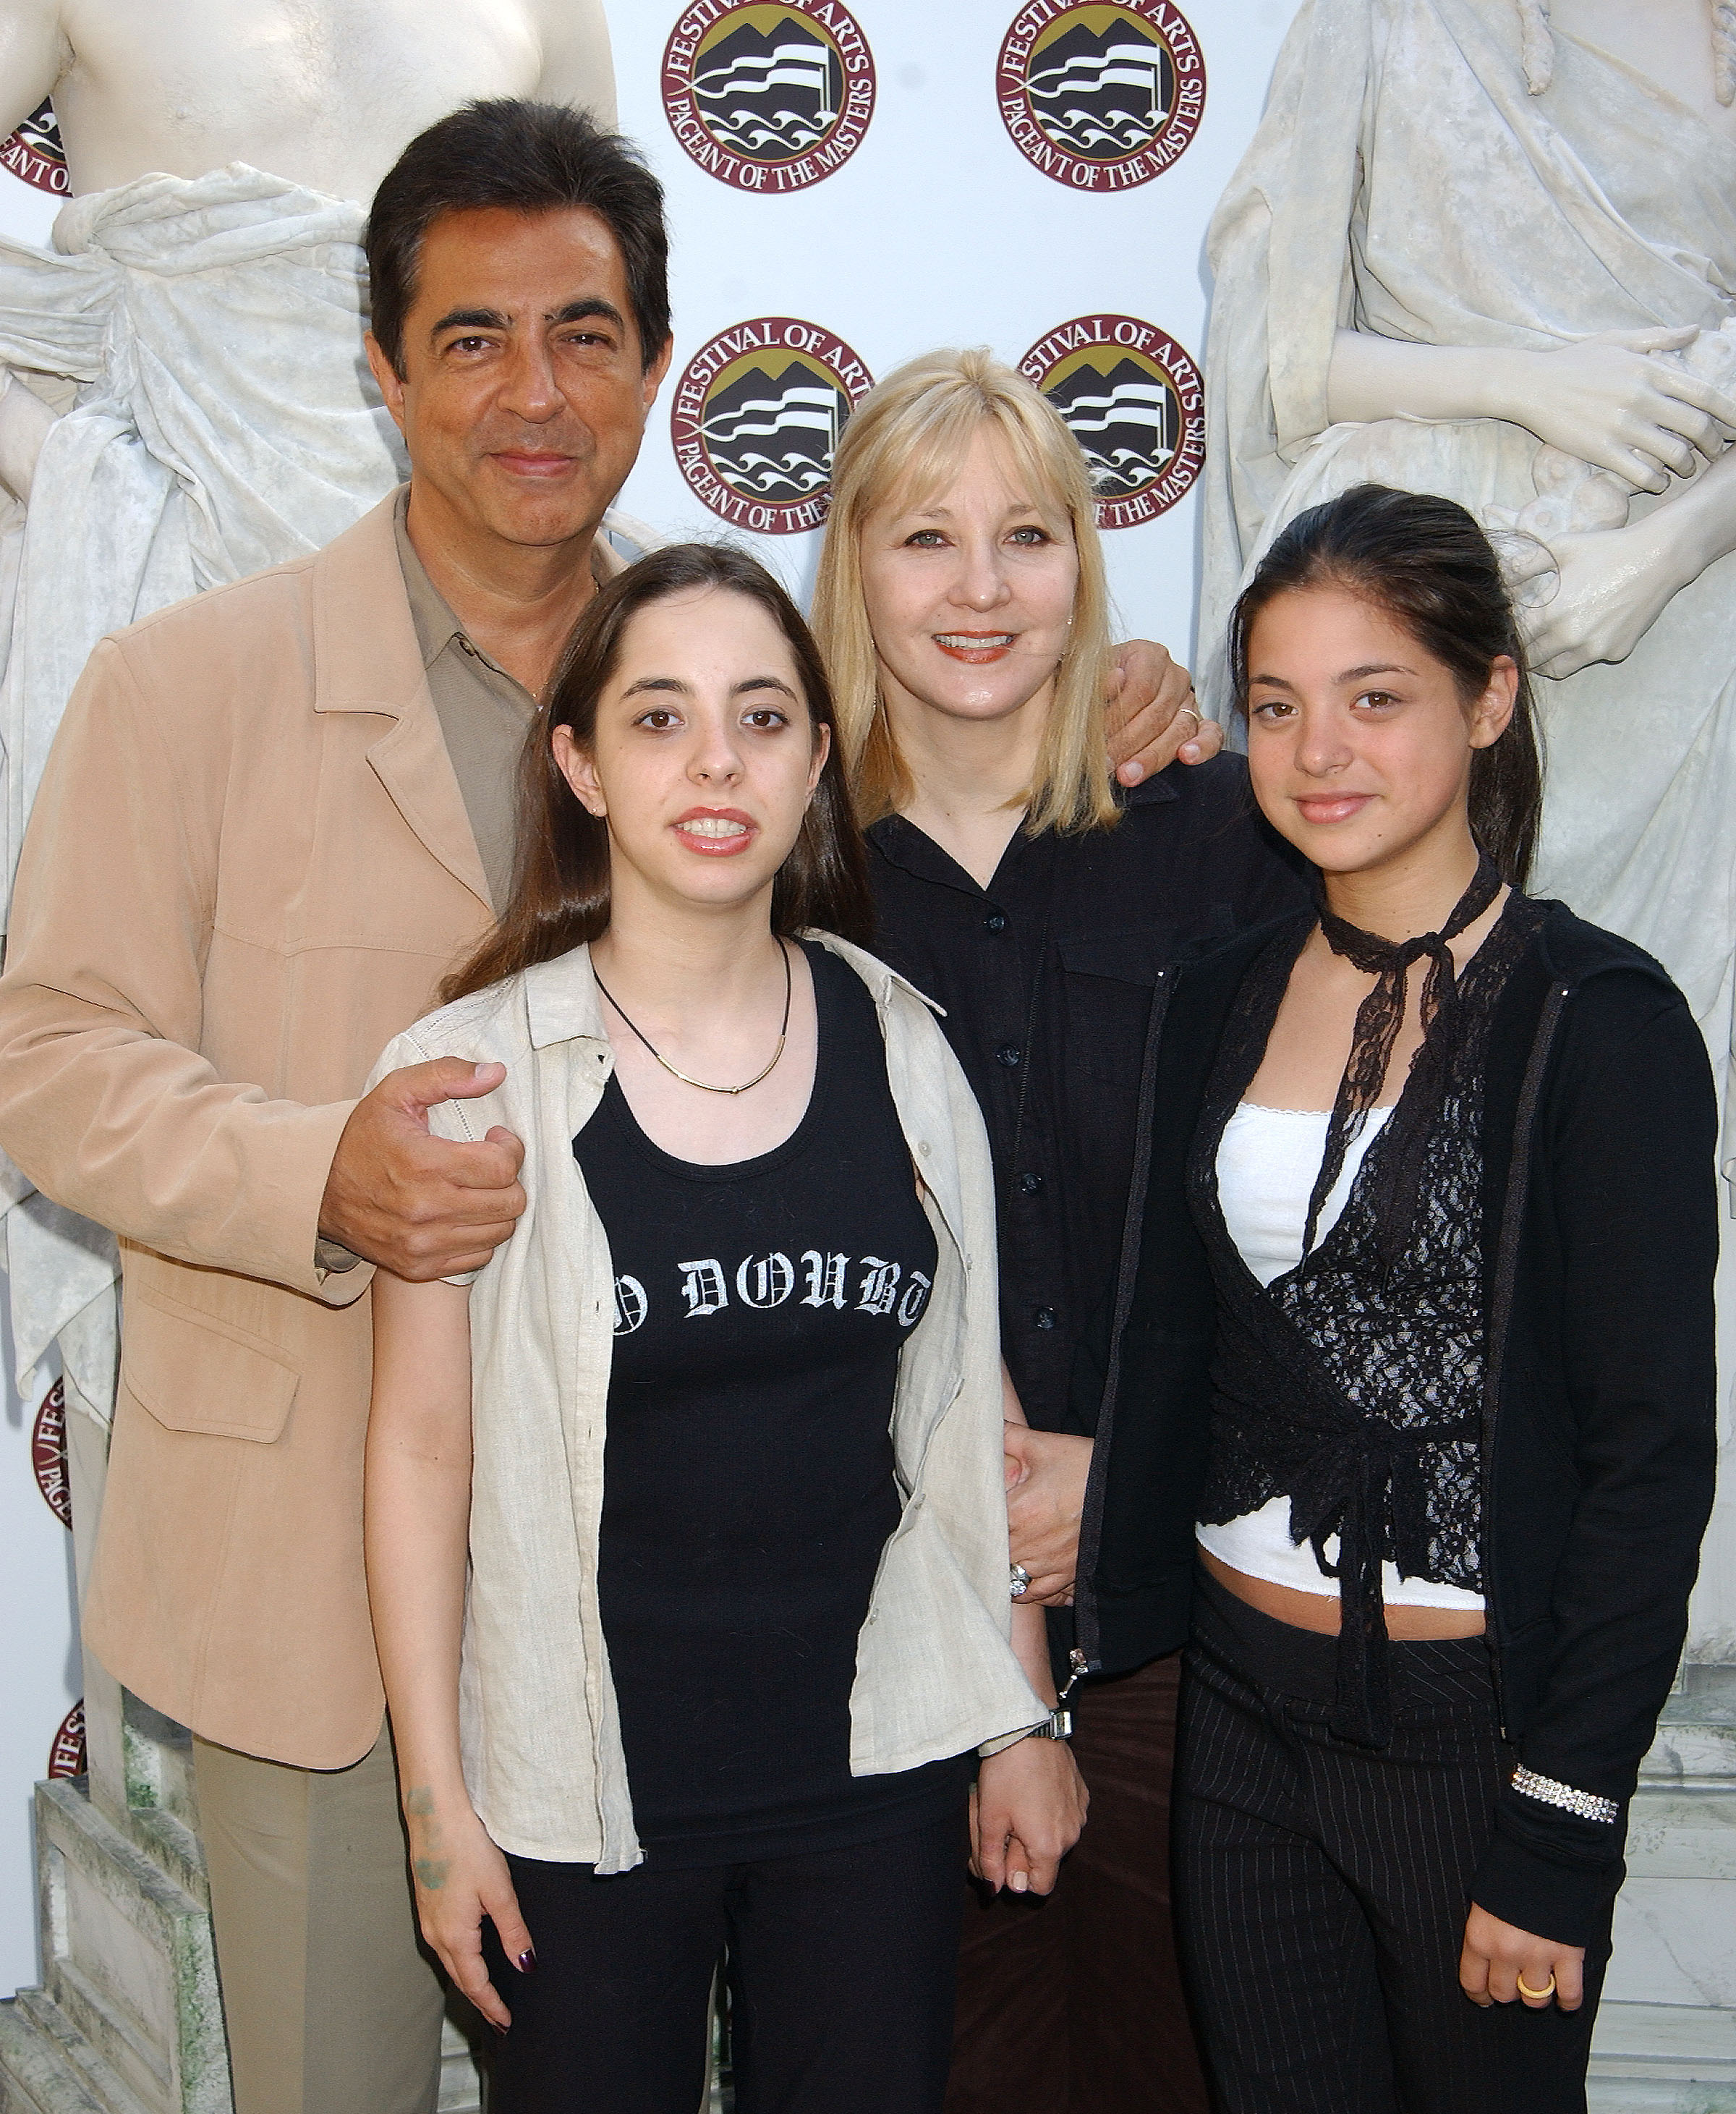 Joe, Mia, and Gia Mantegna with Arlene Vhrel at the 5th Annual Pageant of the Masters Gala Benefit in 2003 | Source: Getty Images